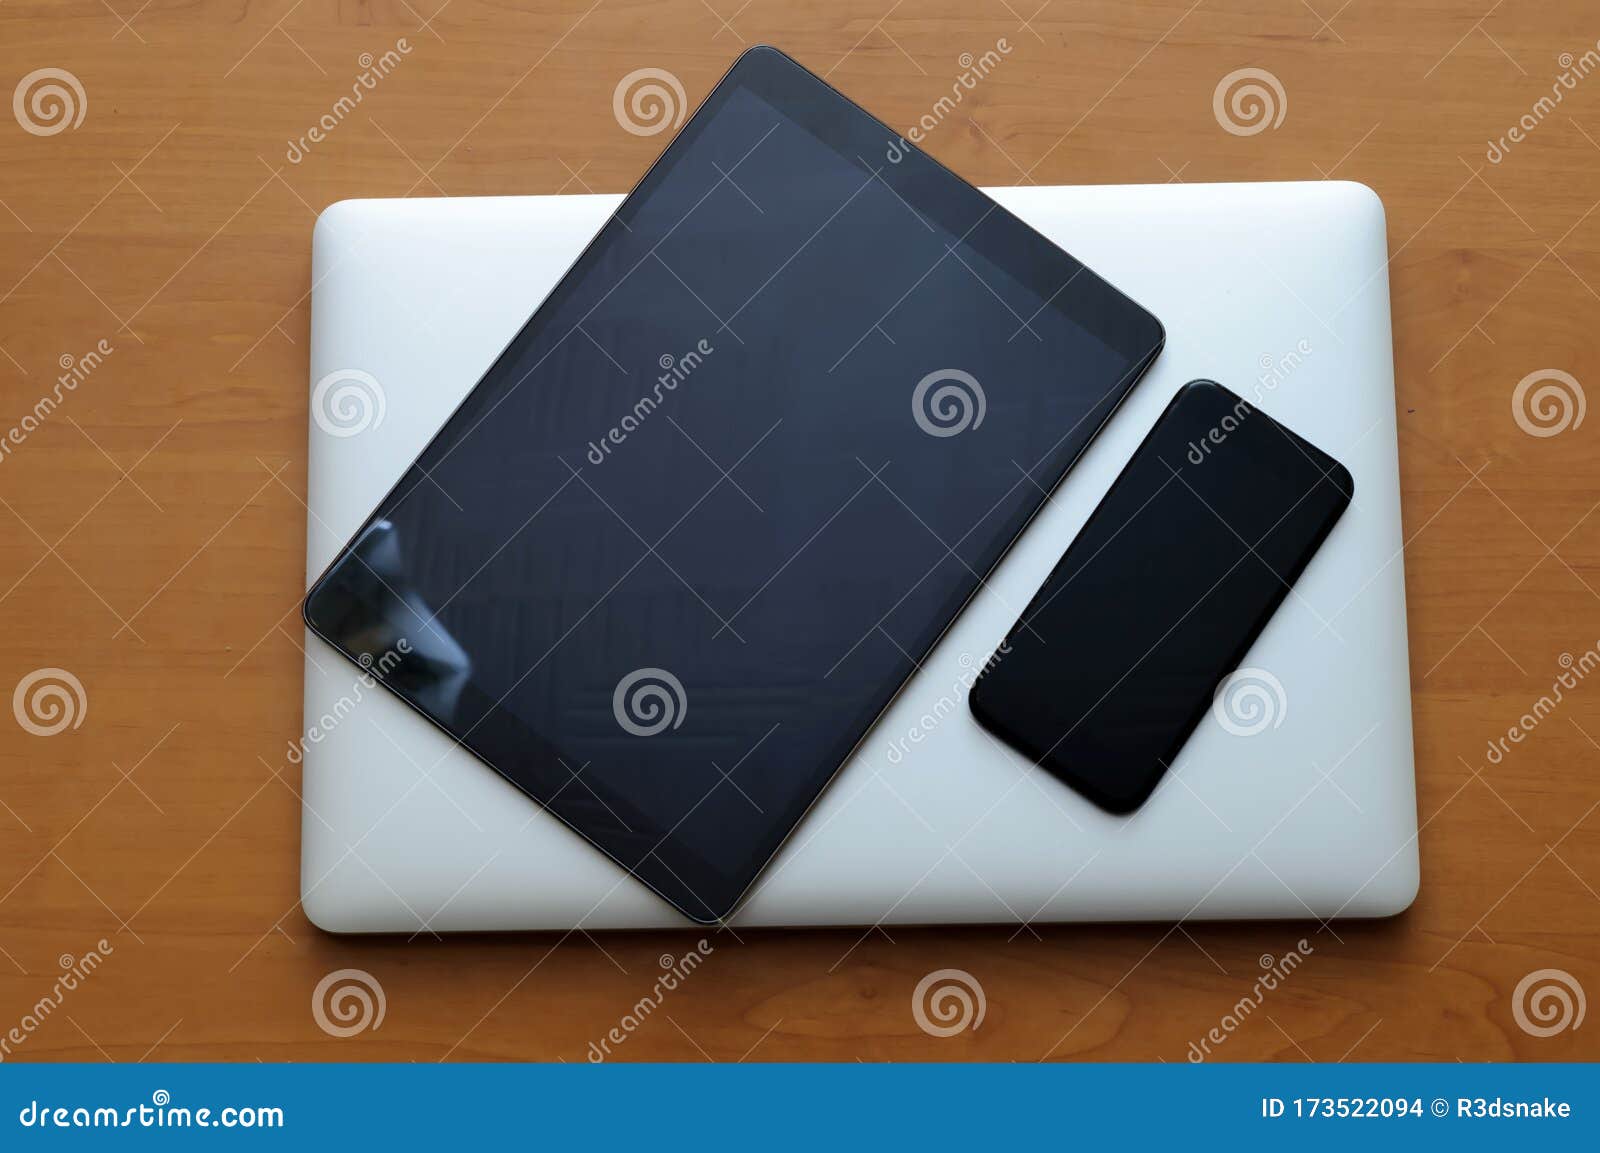 View On A Closed Laptop Pc On A Desk With A Smartphone And Tablet